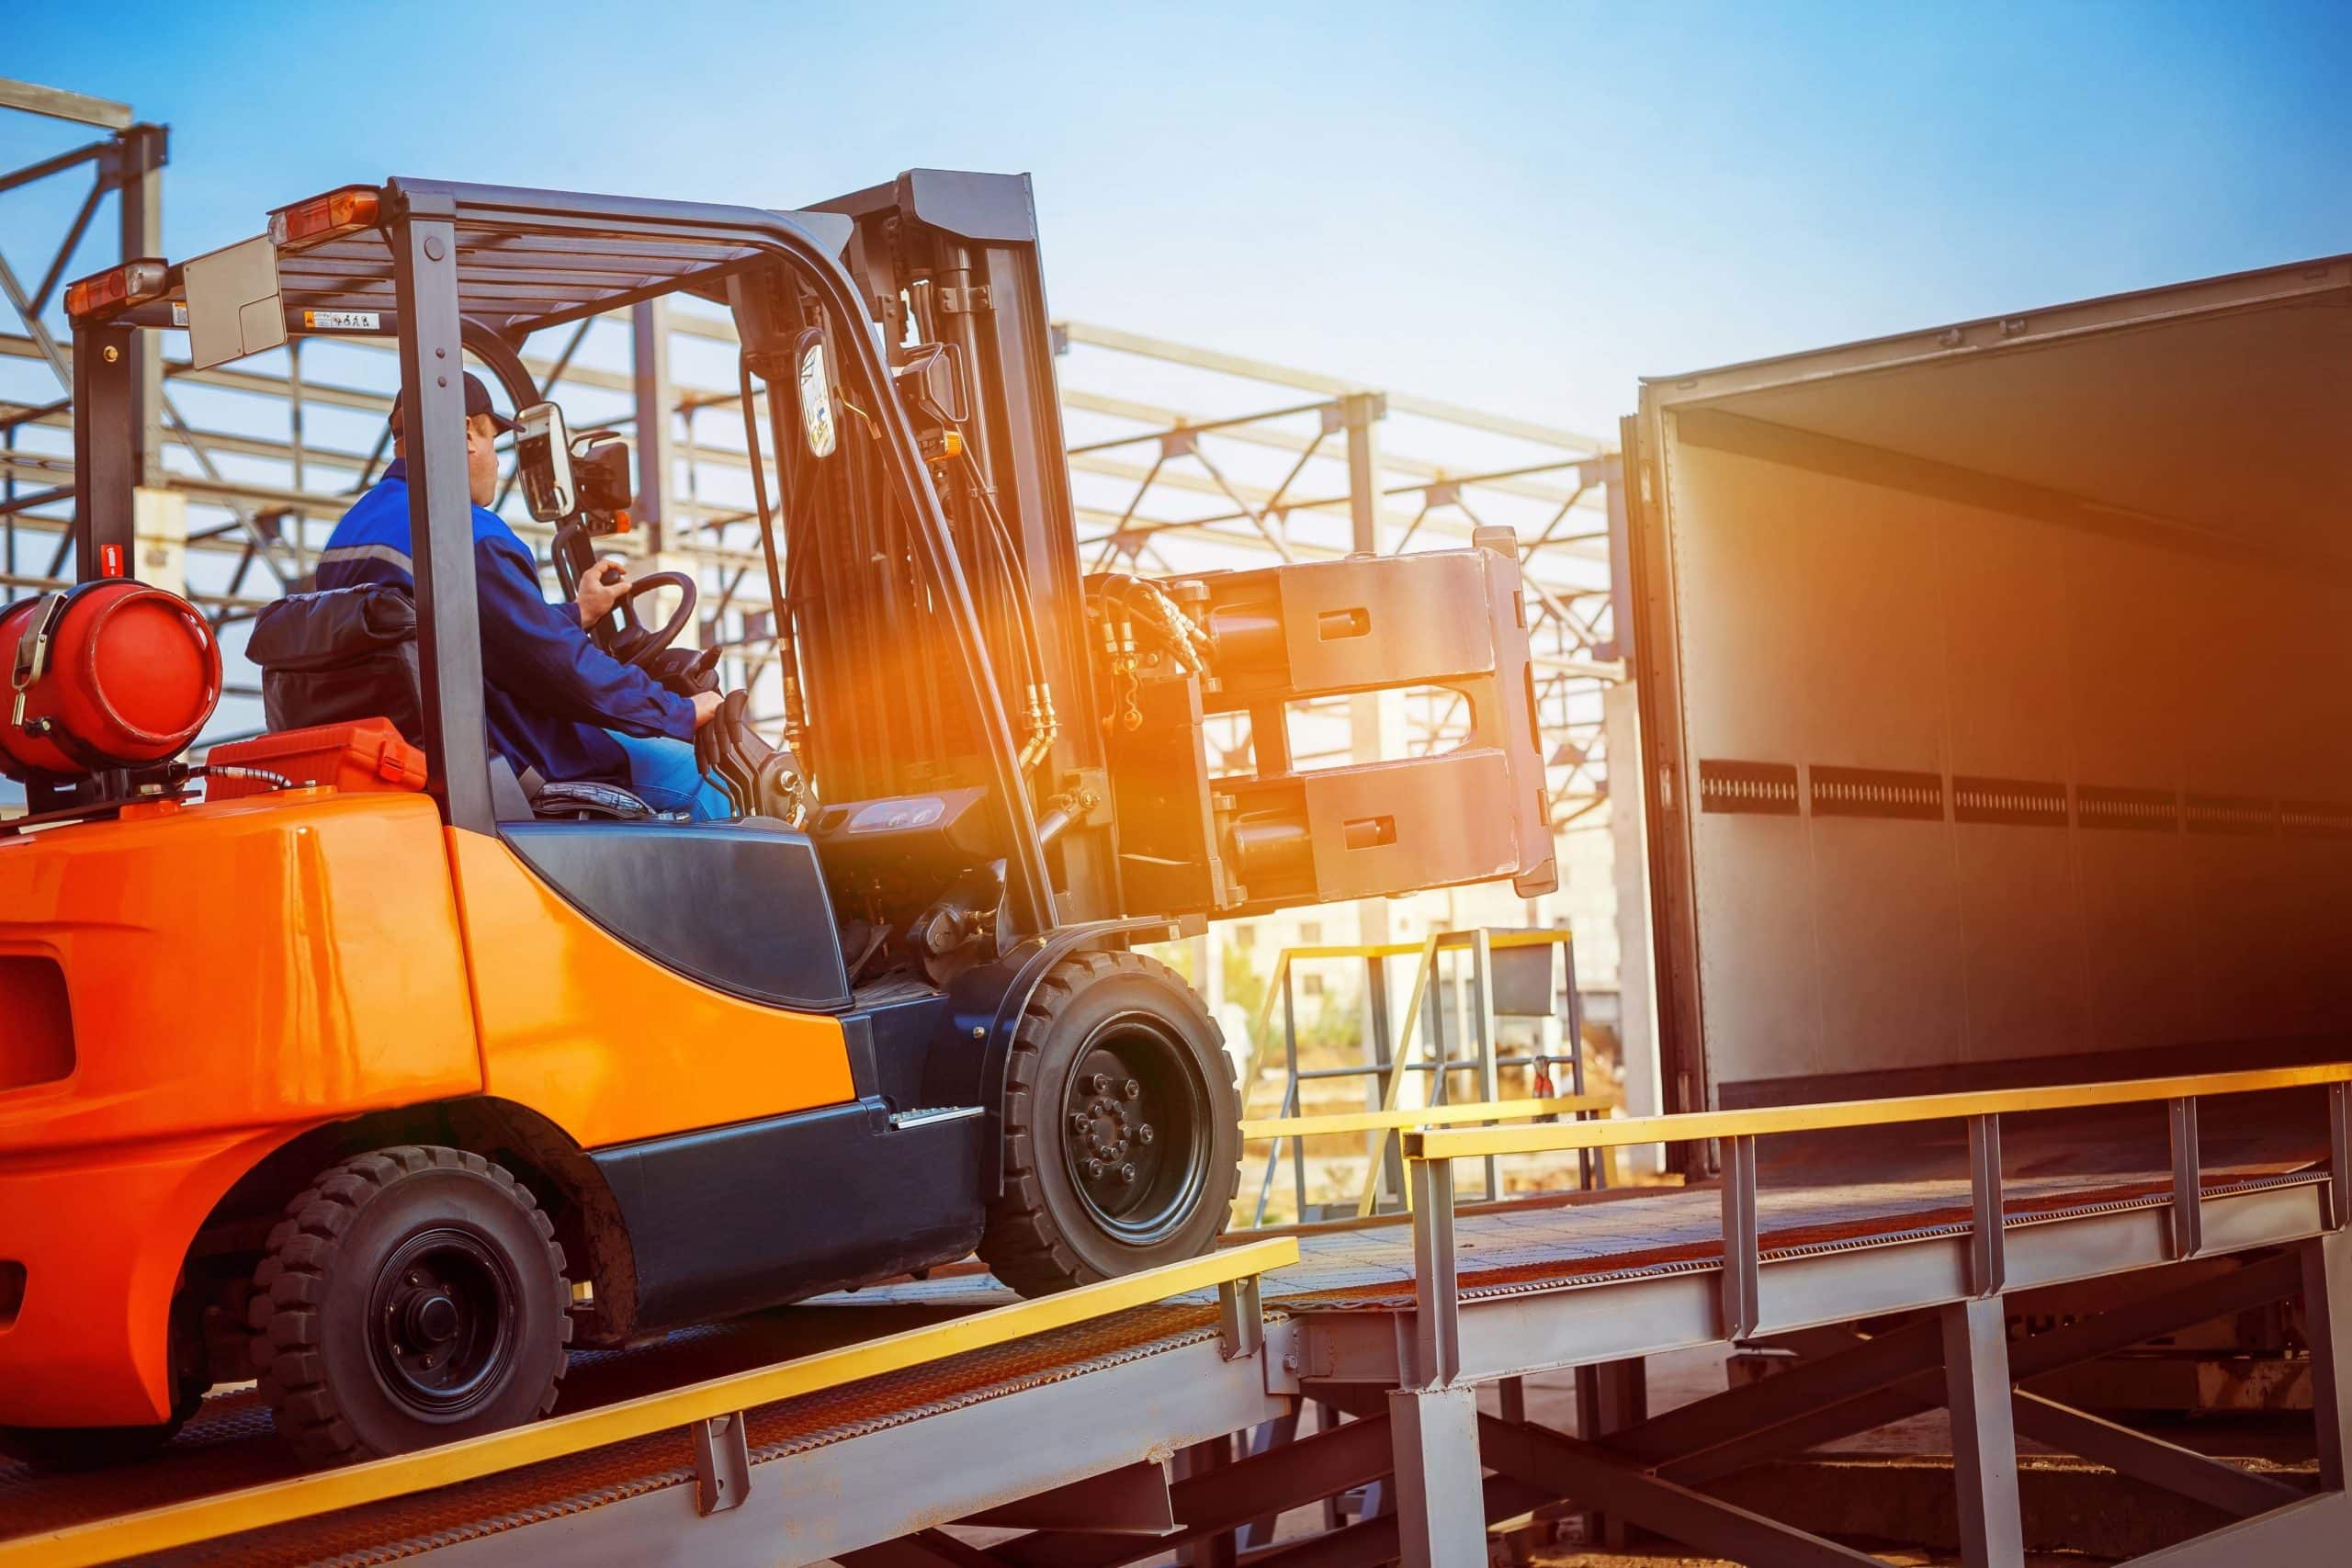 Does your new job require you to have a licence to operate a forklift truck?